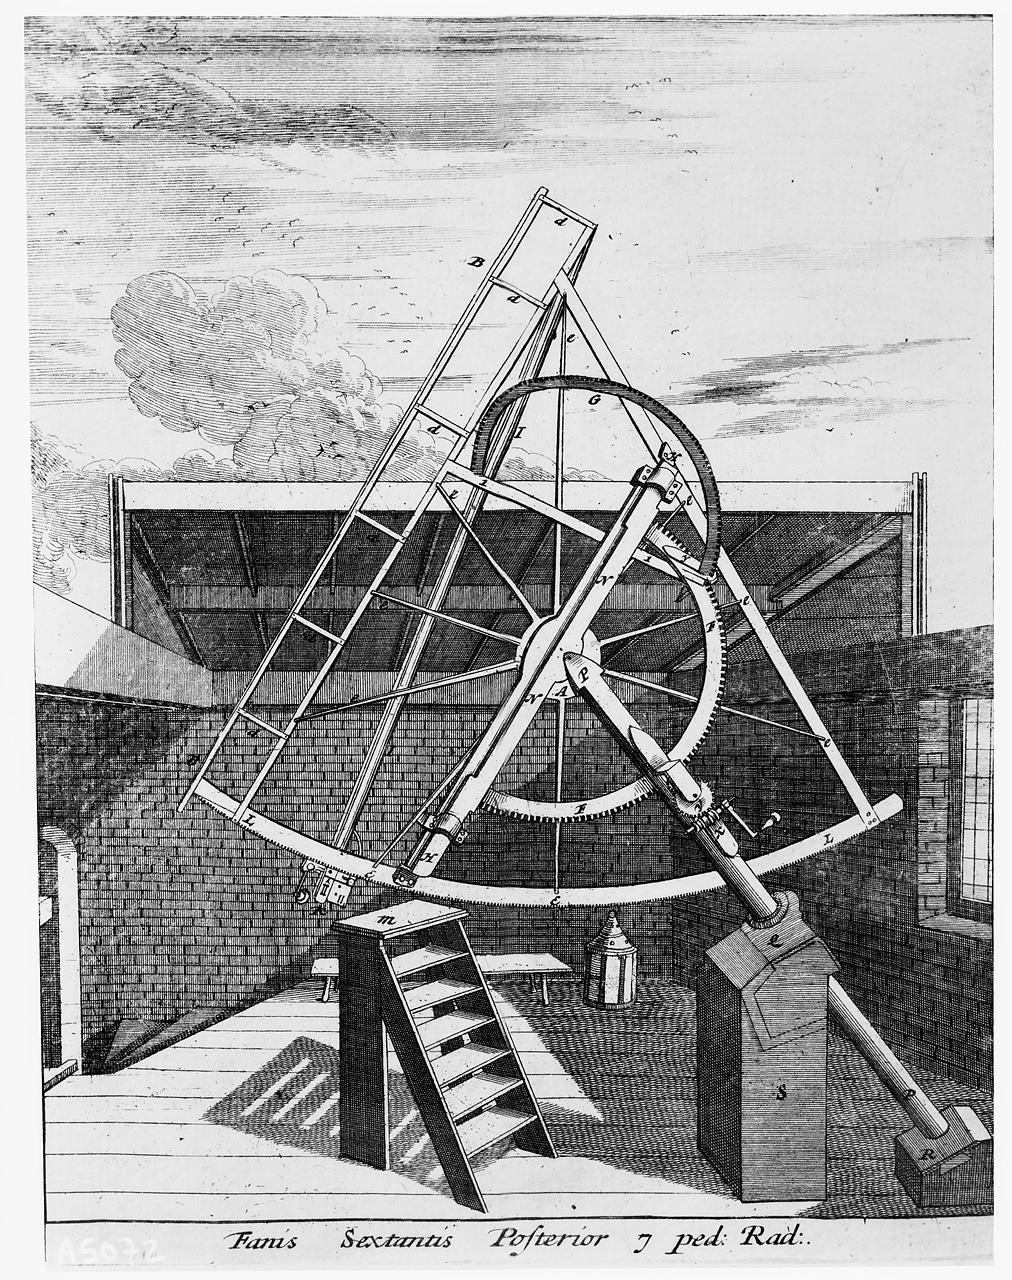 Flamsteed’s 7-foot sextant at the Royal Observatory Greenwich